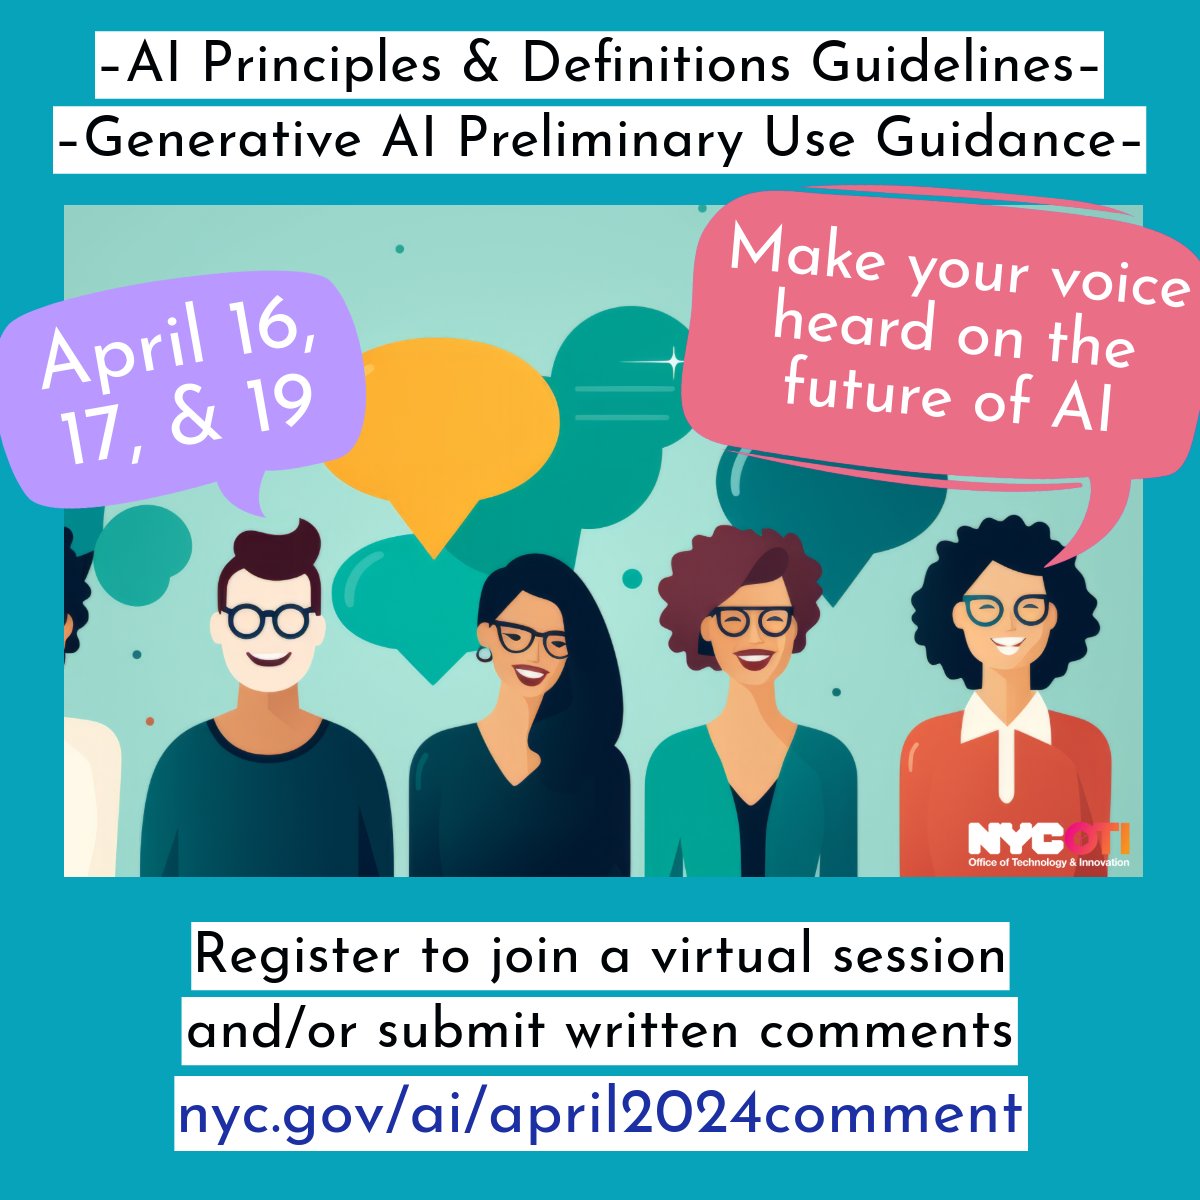 How should NYC define AI? What principles should guide its use? What guidelines should be followed when exploring generative AI tools? NYC wants feedback on its guidance about these questions. Register for an online session now and/or submit comments at nyc.gov/ai/april2024co…